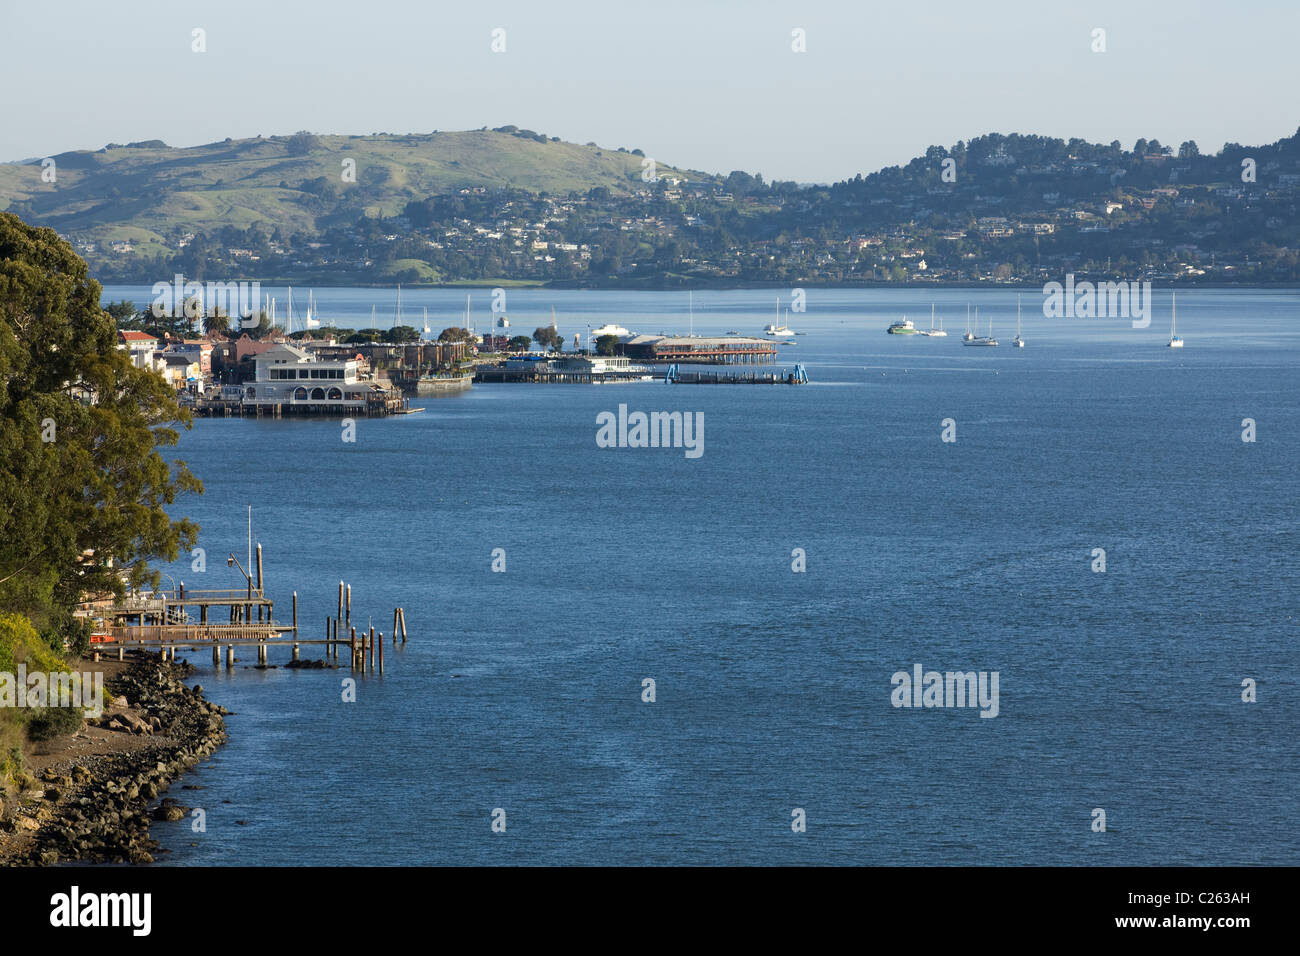 Picturesque Californian waterfront town of Sausalito Stock Photo